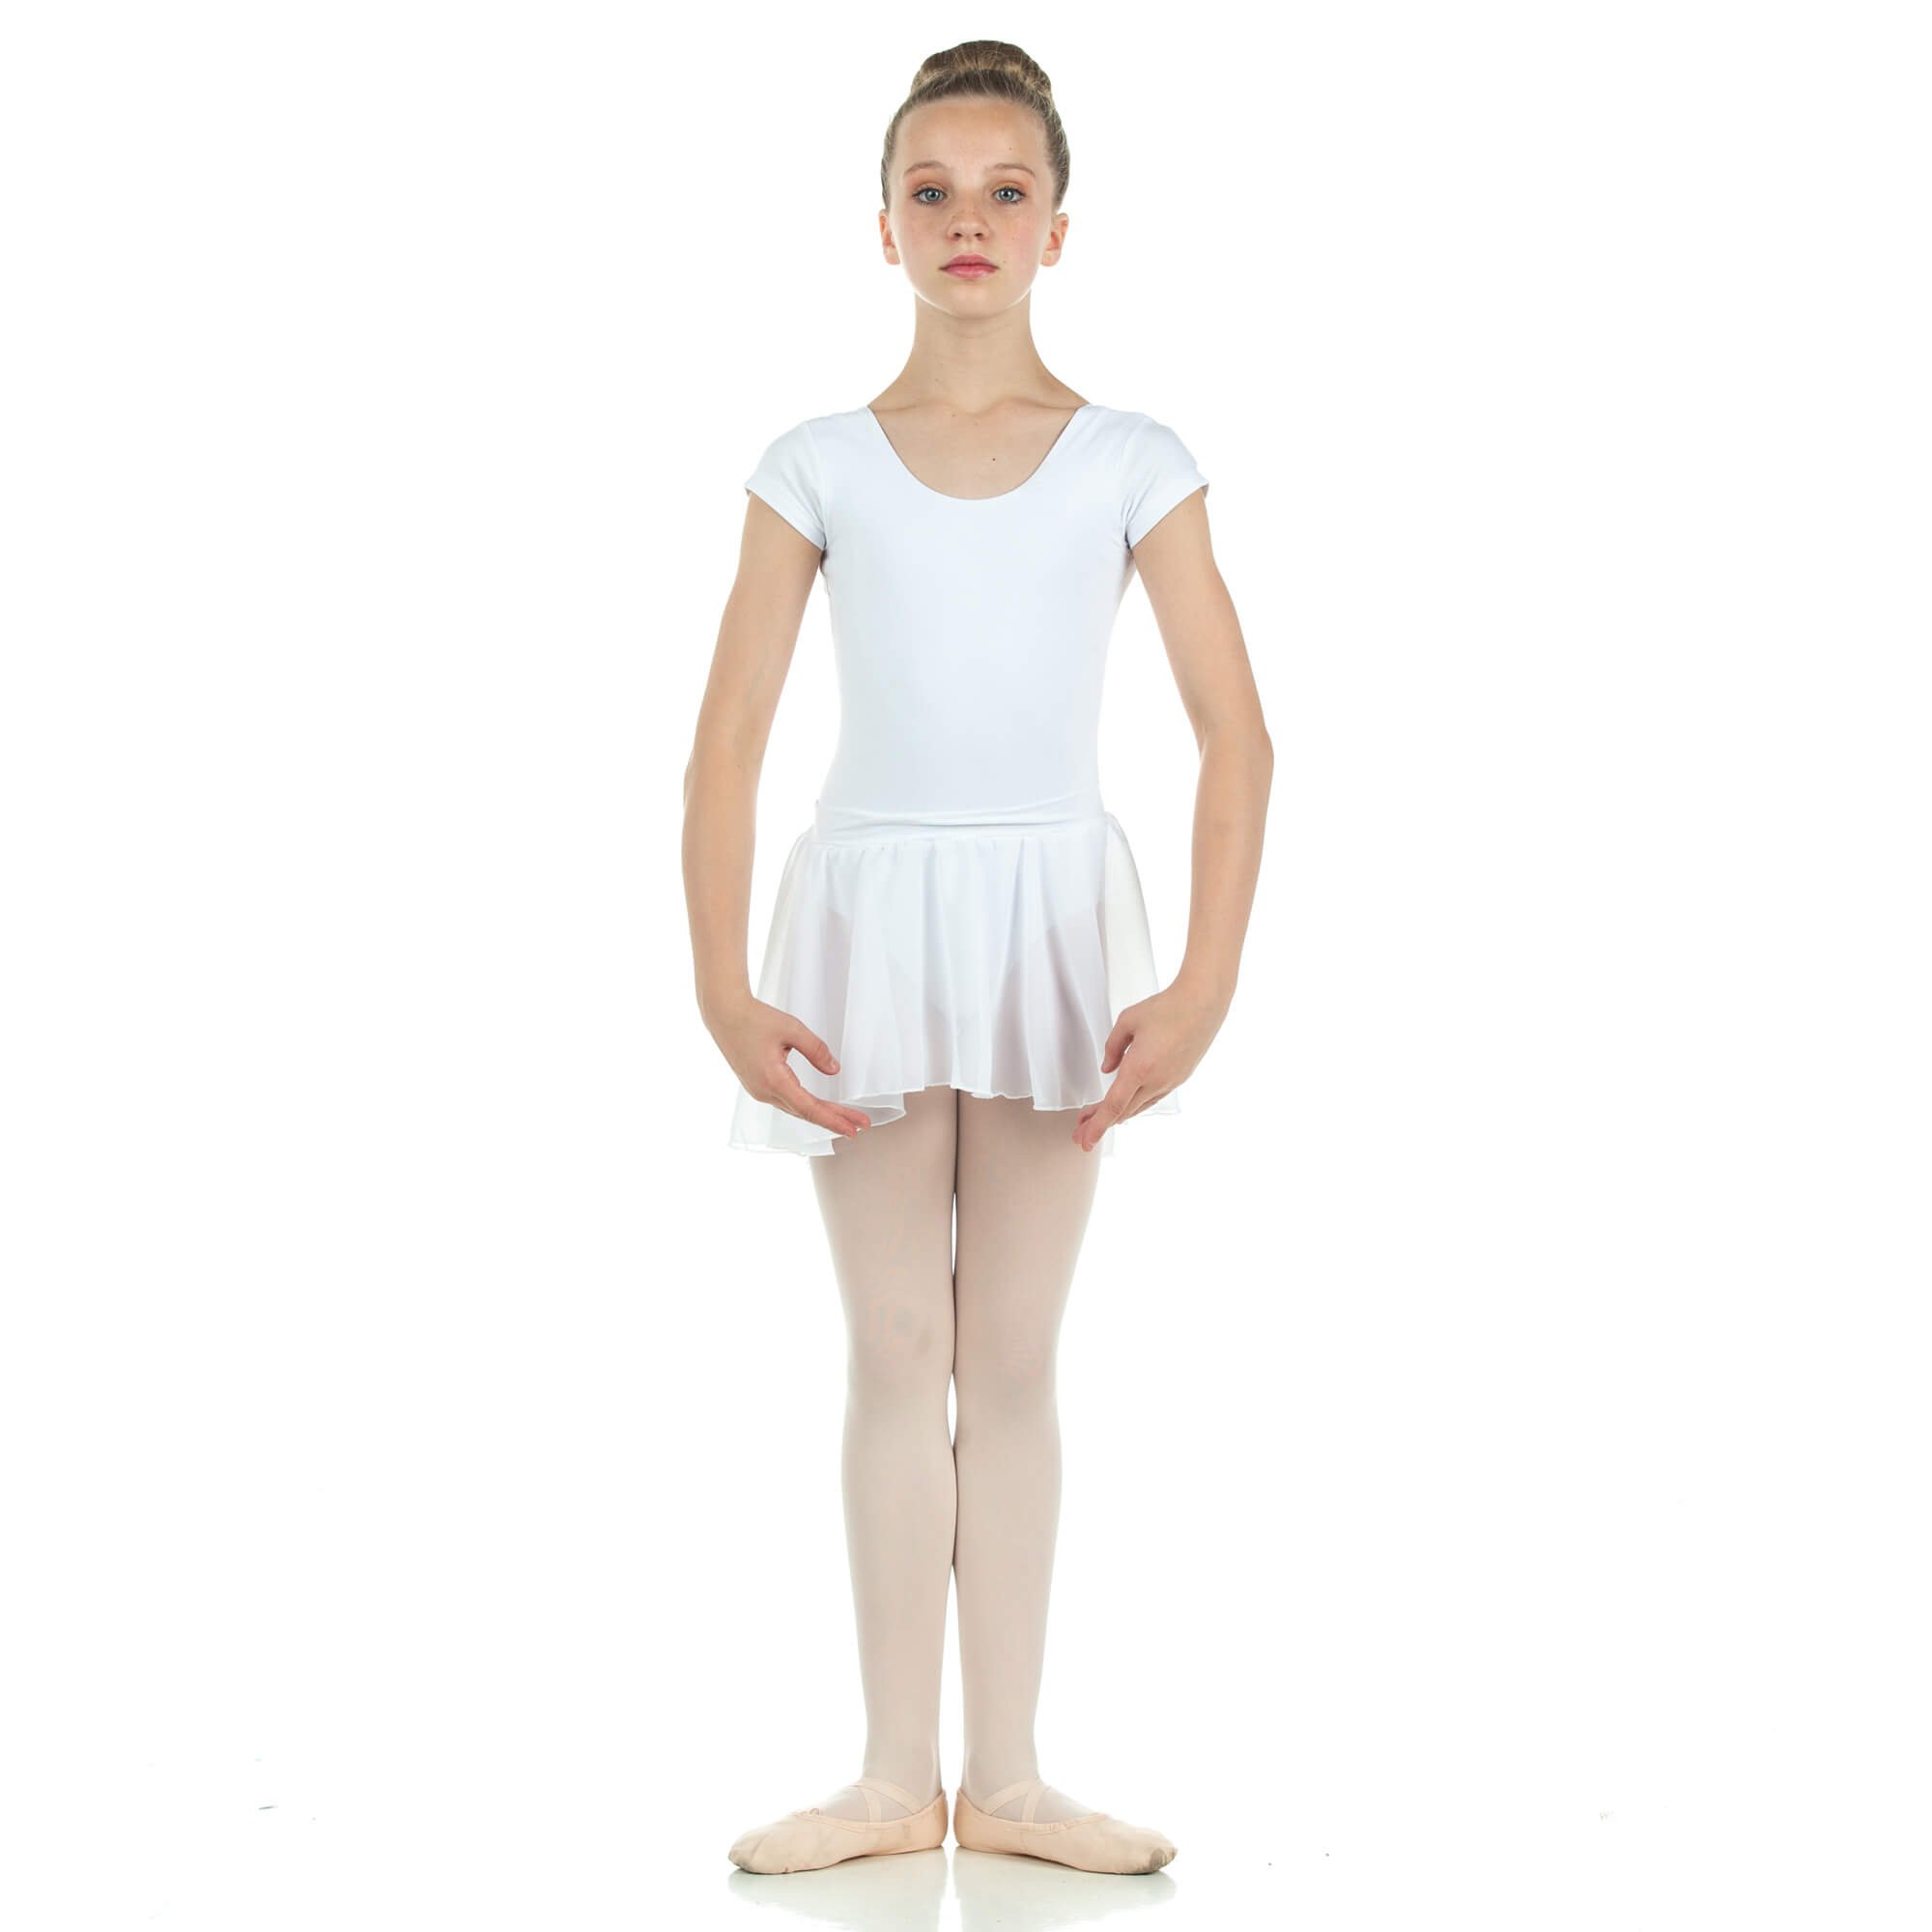 Danzcue Child Chiffon Ballet Dance Pull On Wrap Skirt - Click Image to Close